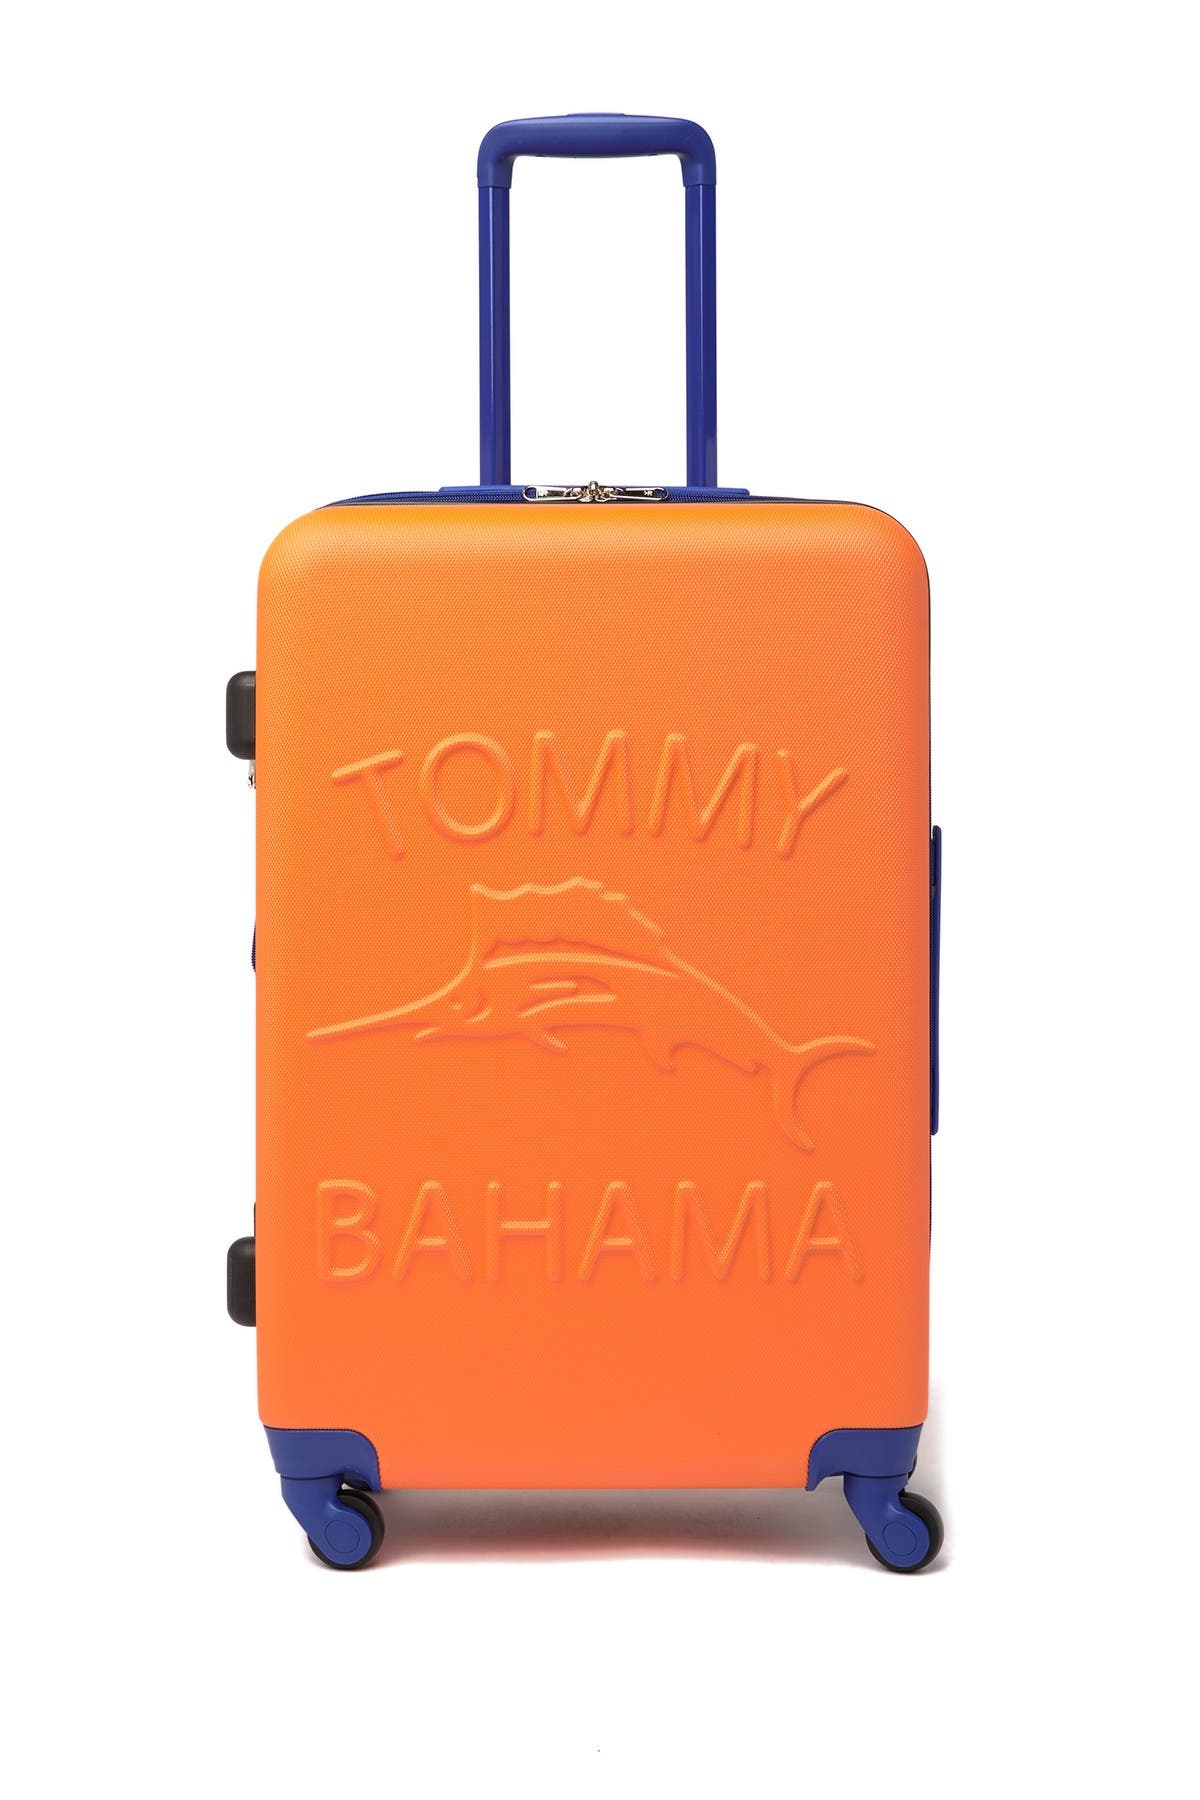 tommy bahama suitcase review